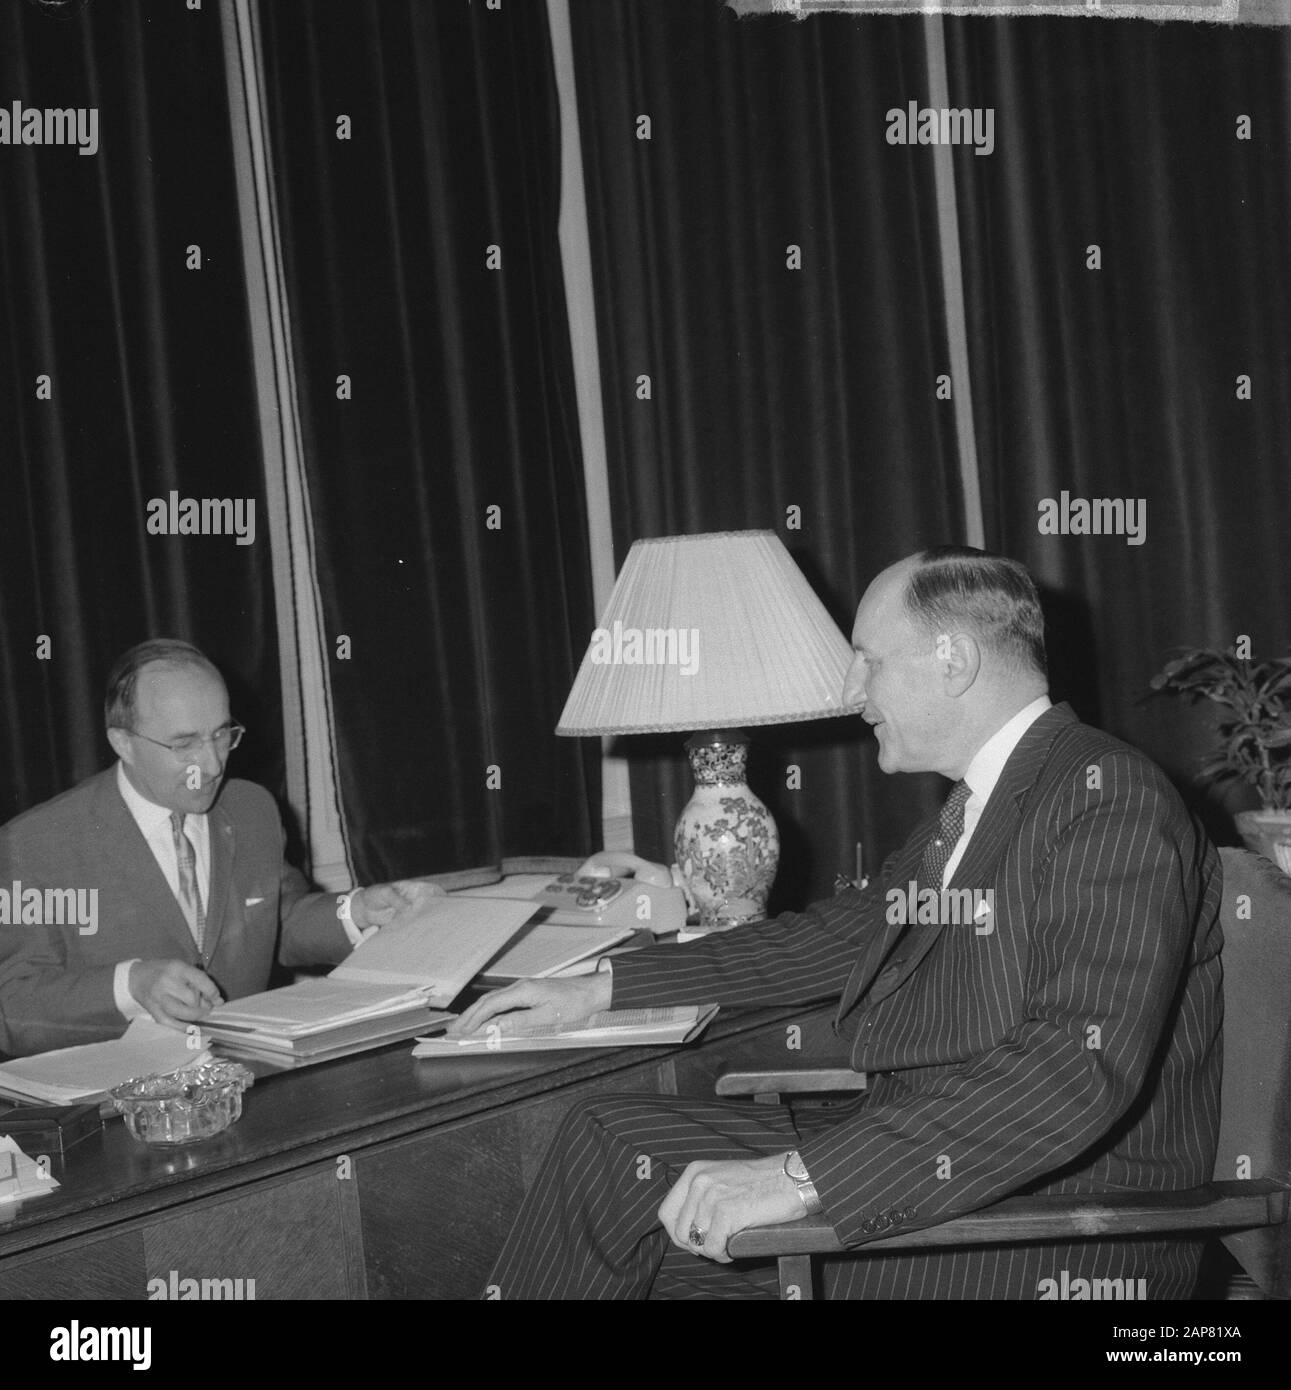 The cabinet formation mr. Cals in conversation with minister Luns Date: 8 april 1965 Location: The Hague, Zuid-Holland Keywords: conversations, cabinet formations Personal name: Cals, Jo, Luns, J.A.M.H., Luns, Joseph Stock Photo